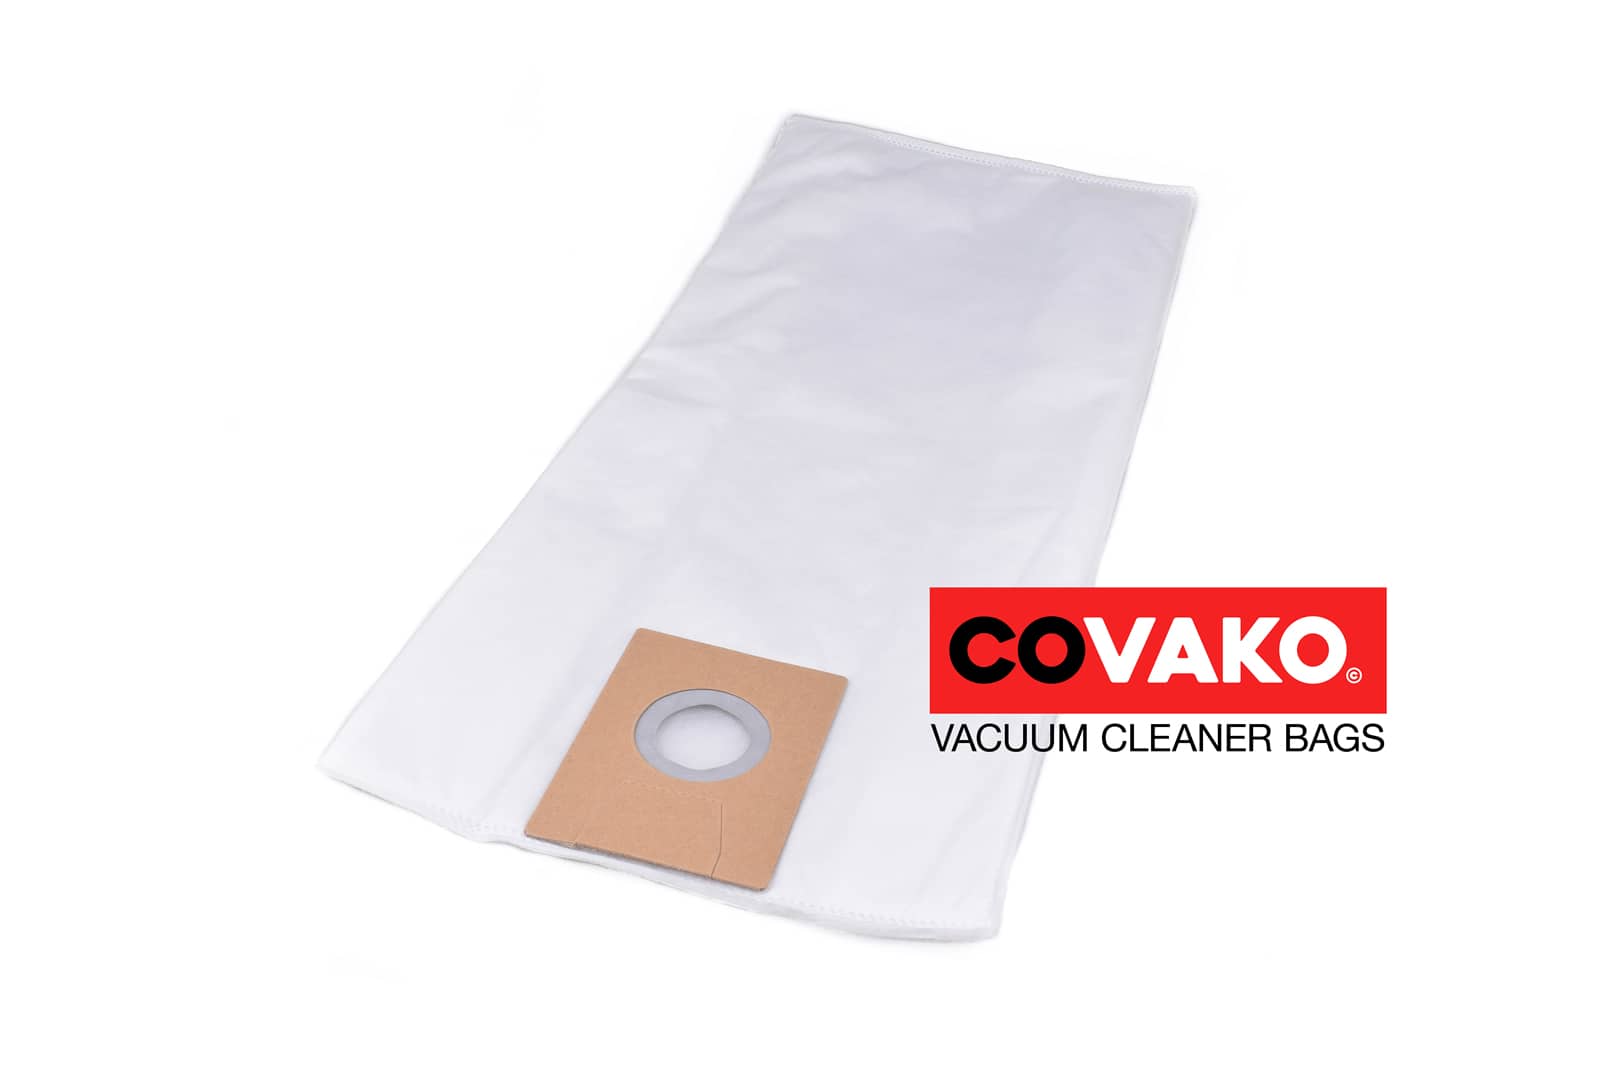 Fimap FV 60 / Synthesis - Fimap vacuum cleaner bags